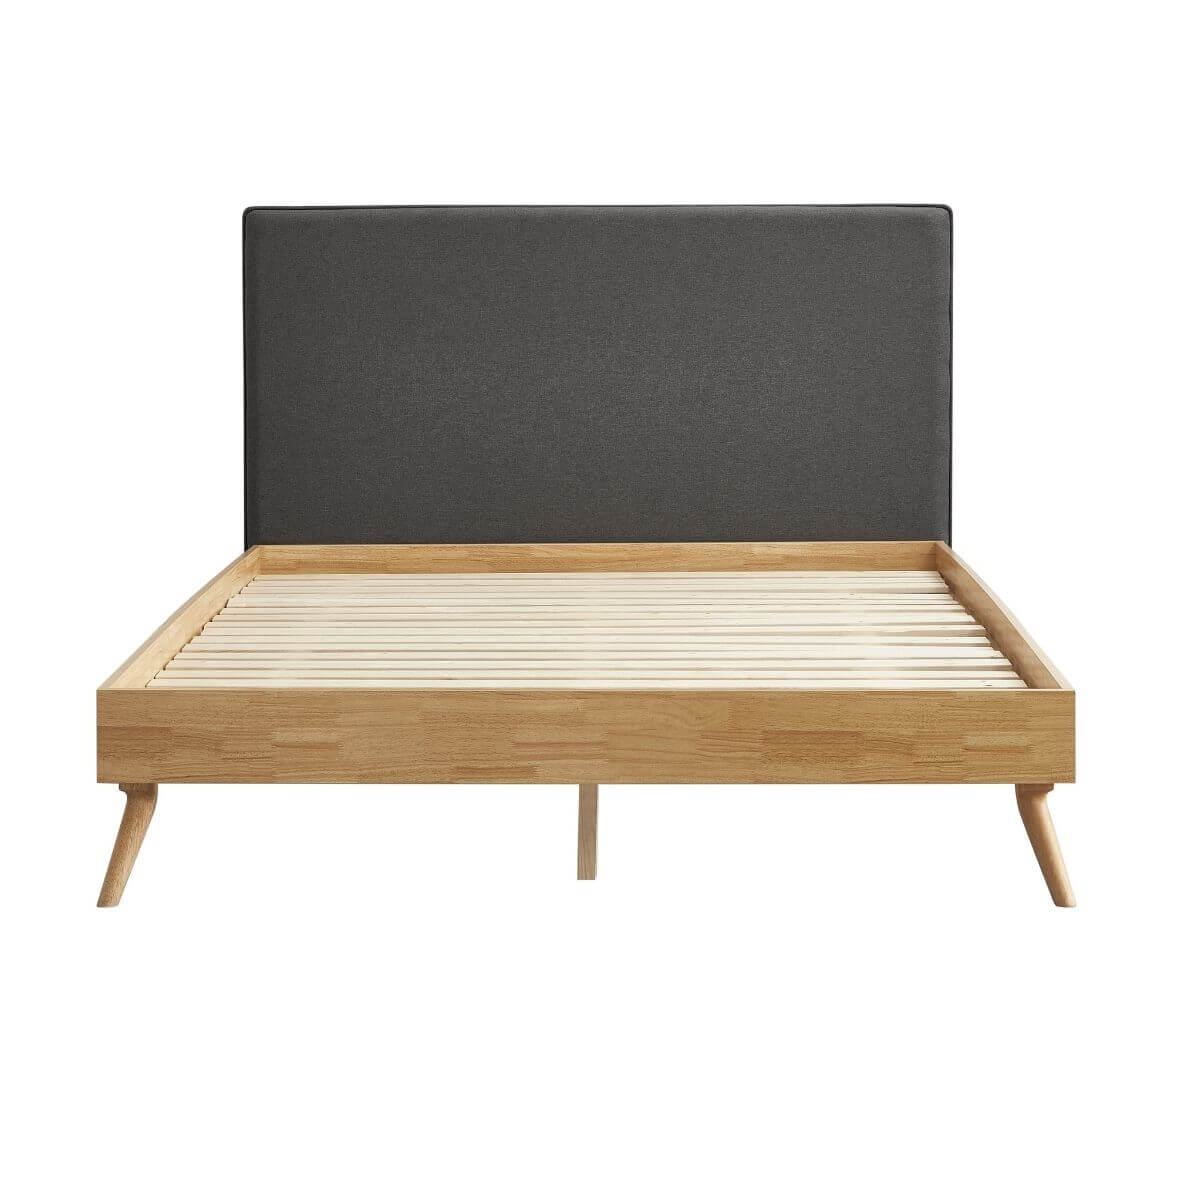 Oak Queen Bed Frame with Chic Fabric Headboard-Upinteriors